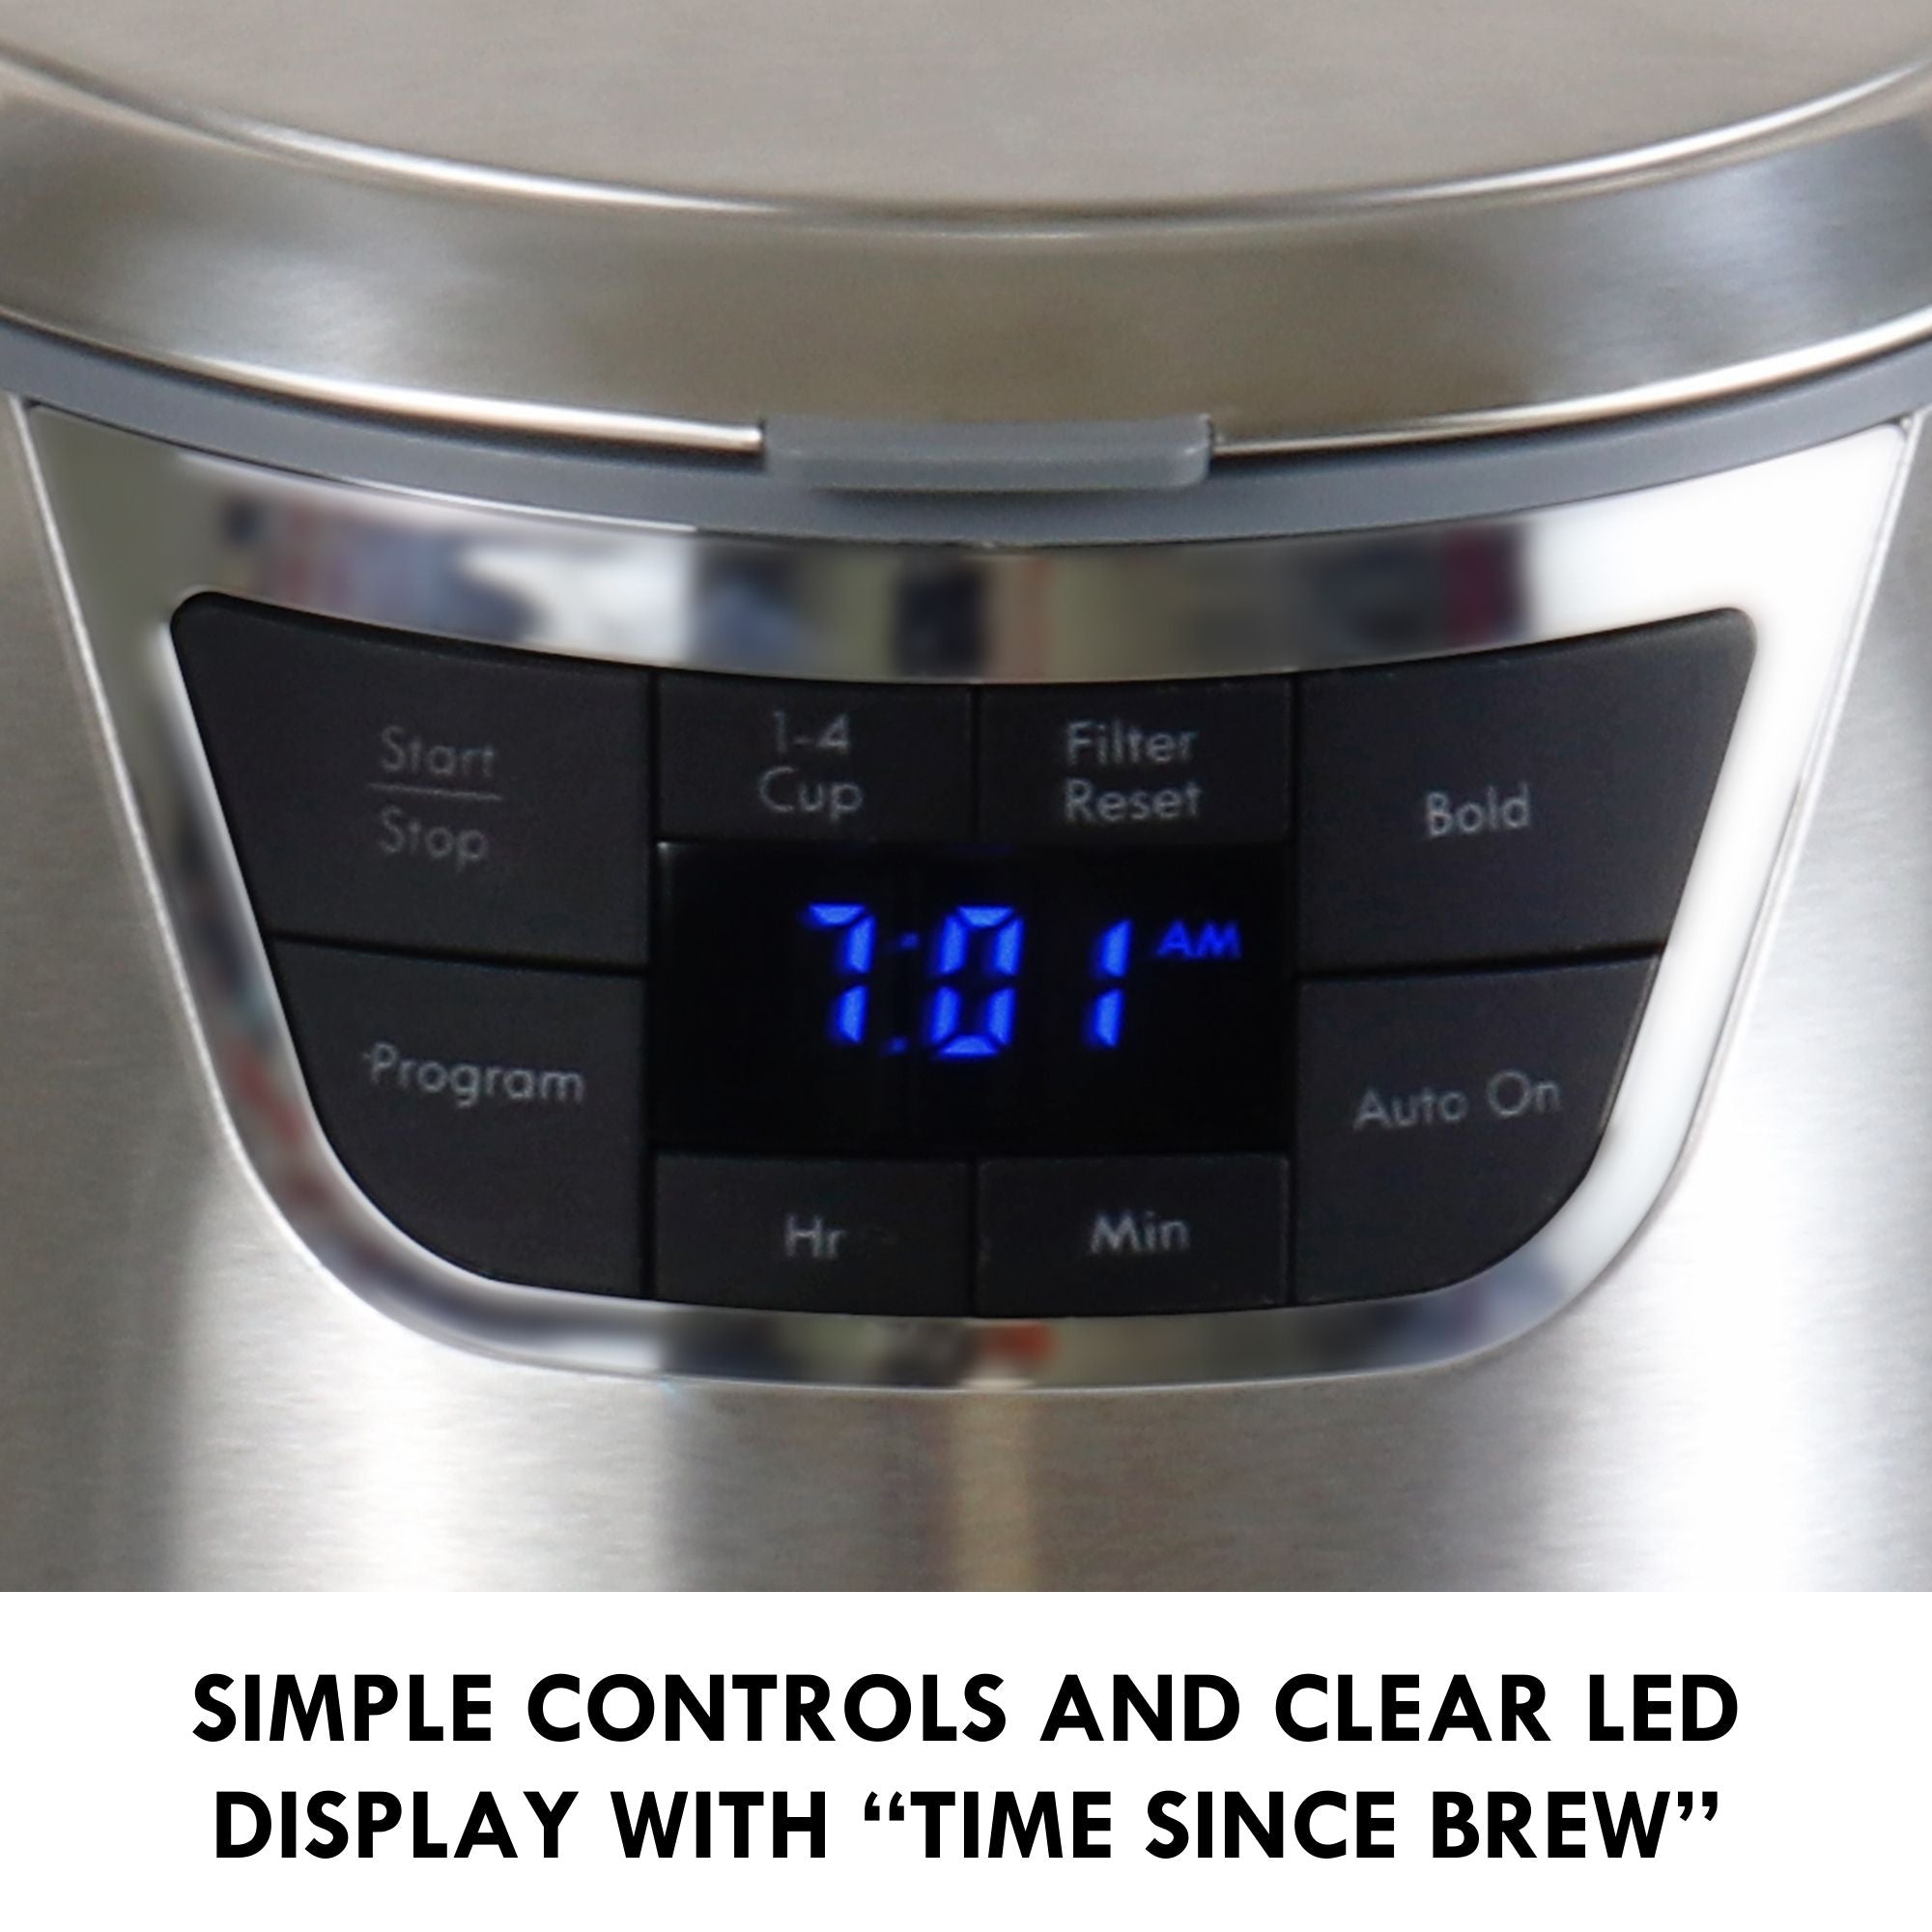 Closeup mage of coffeemaker controls and digital display. Text below reads, "Simple controls and clear LED display with "Time Since Brew""